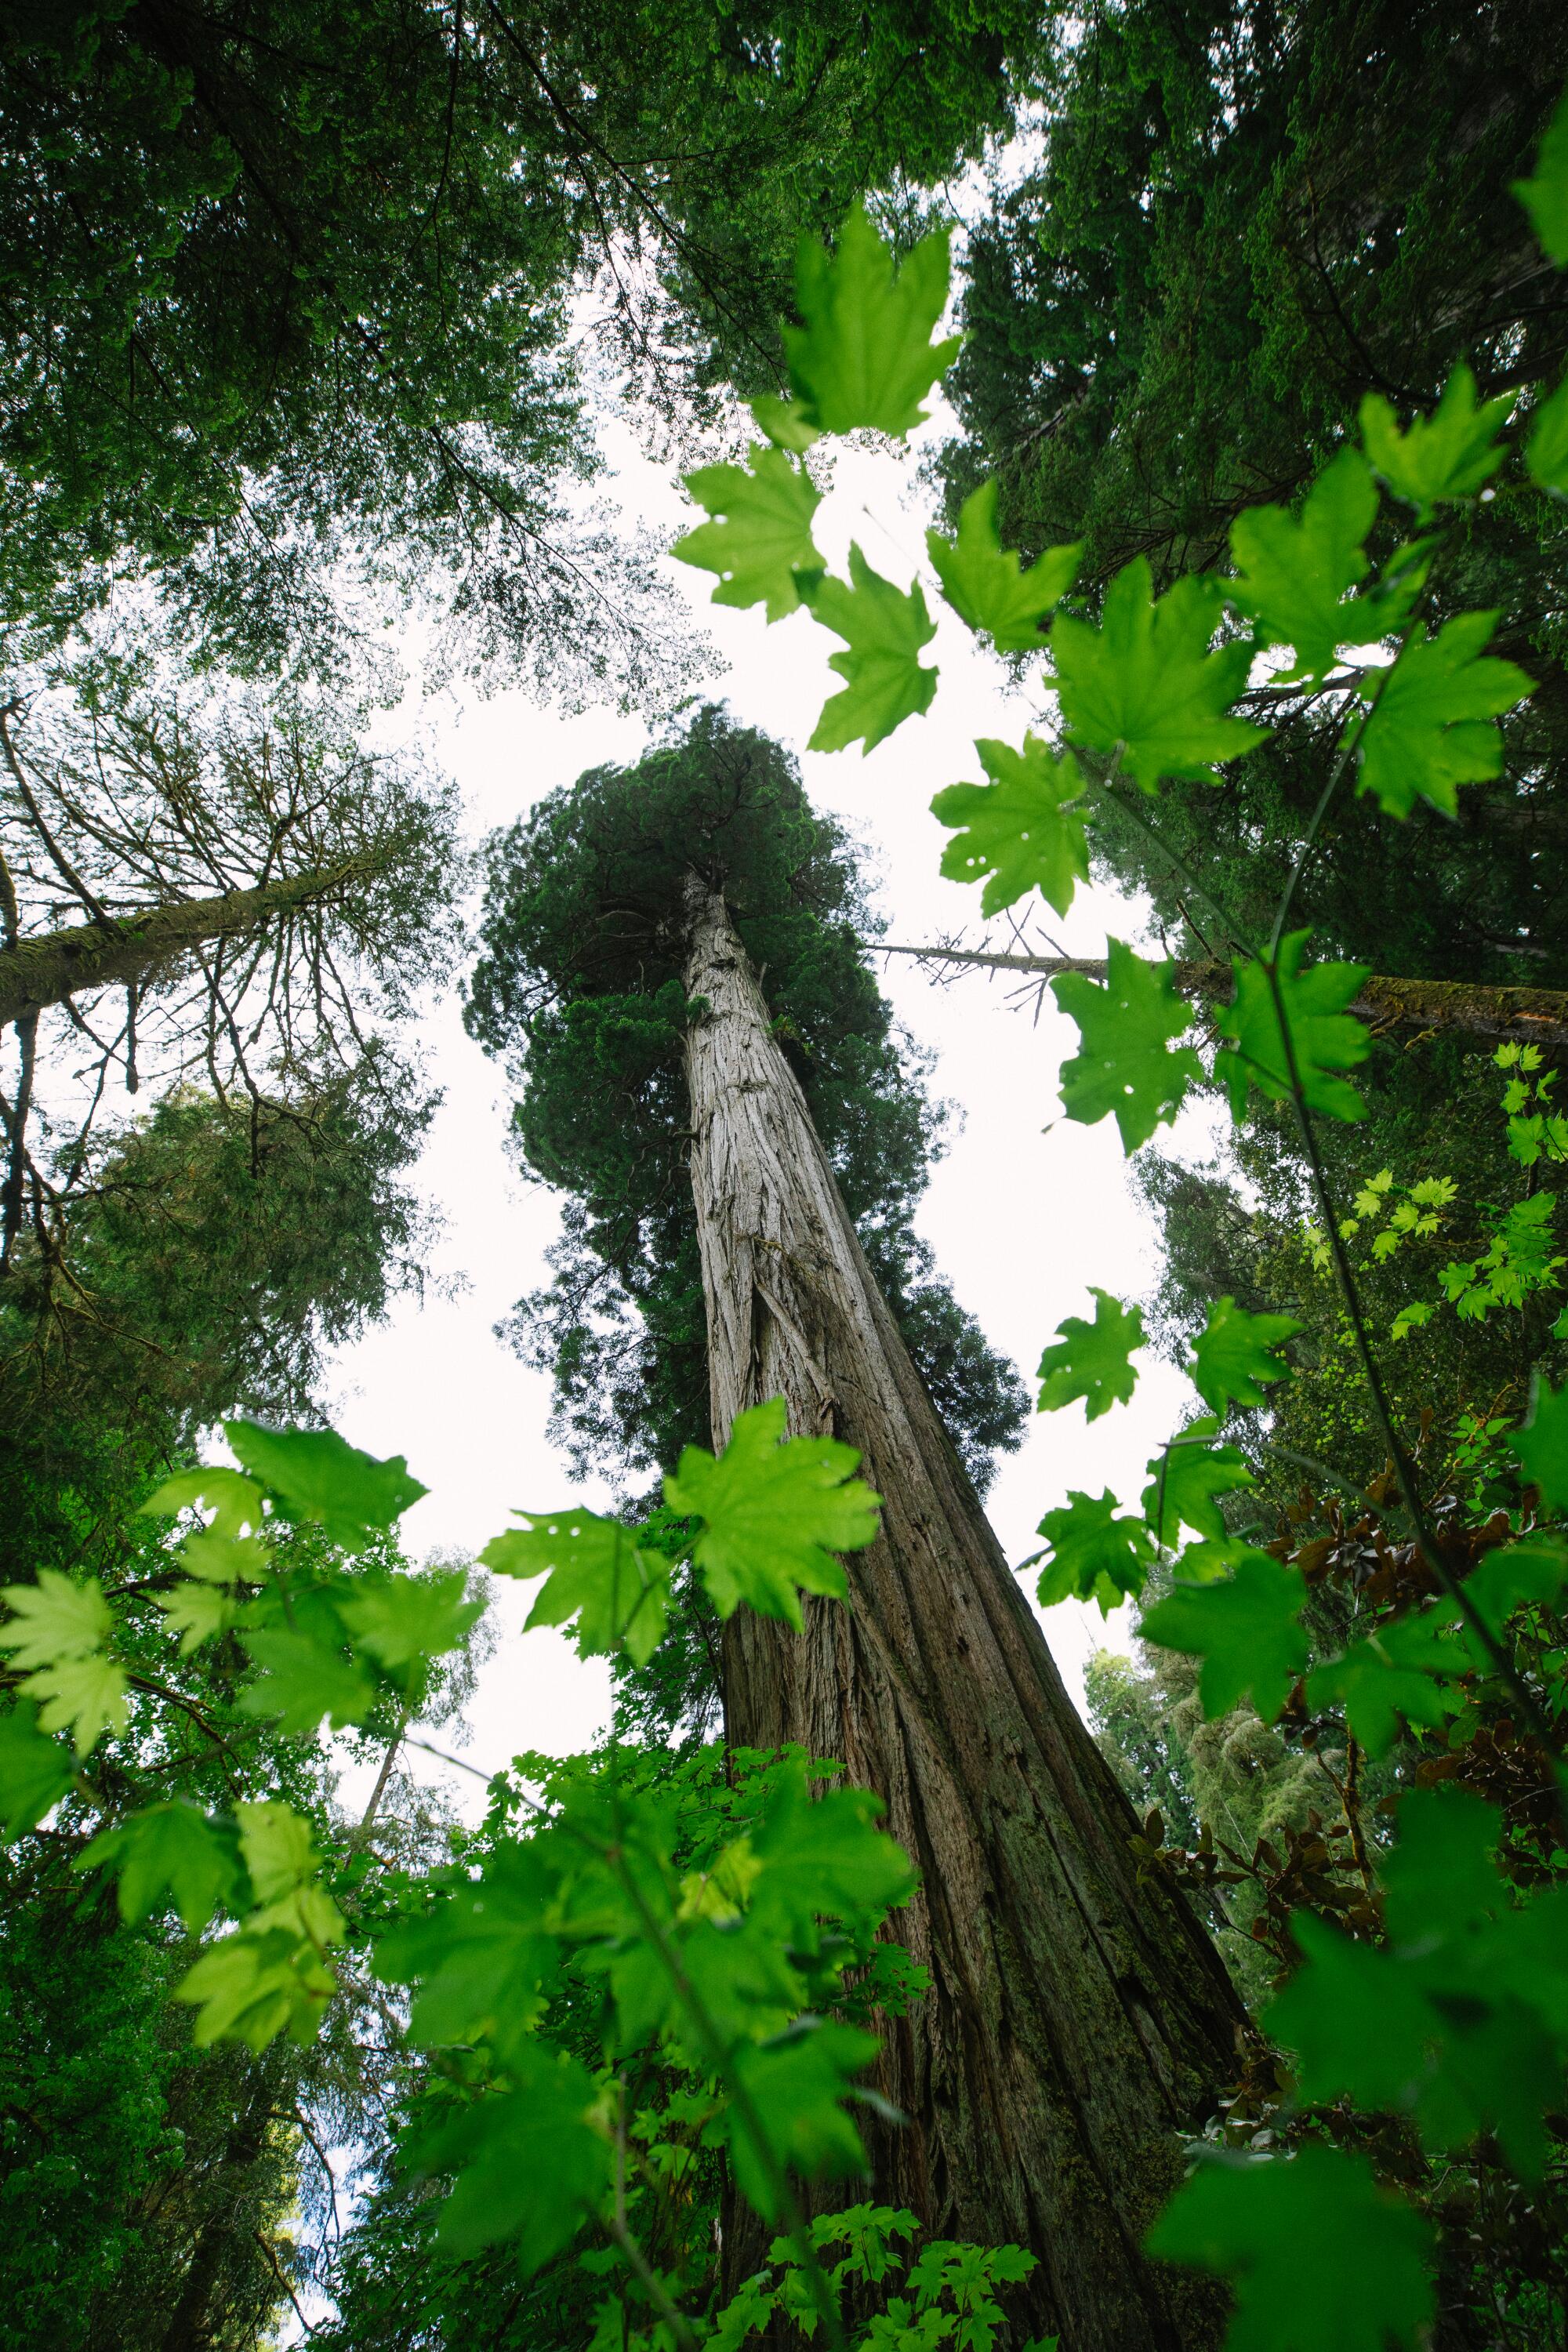 Looking up at towering redwoods on Mill Creek Trail.